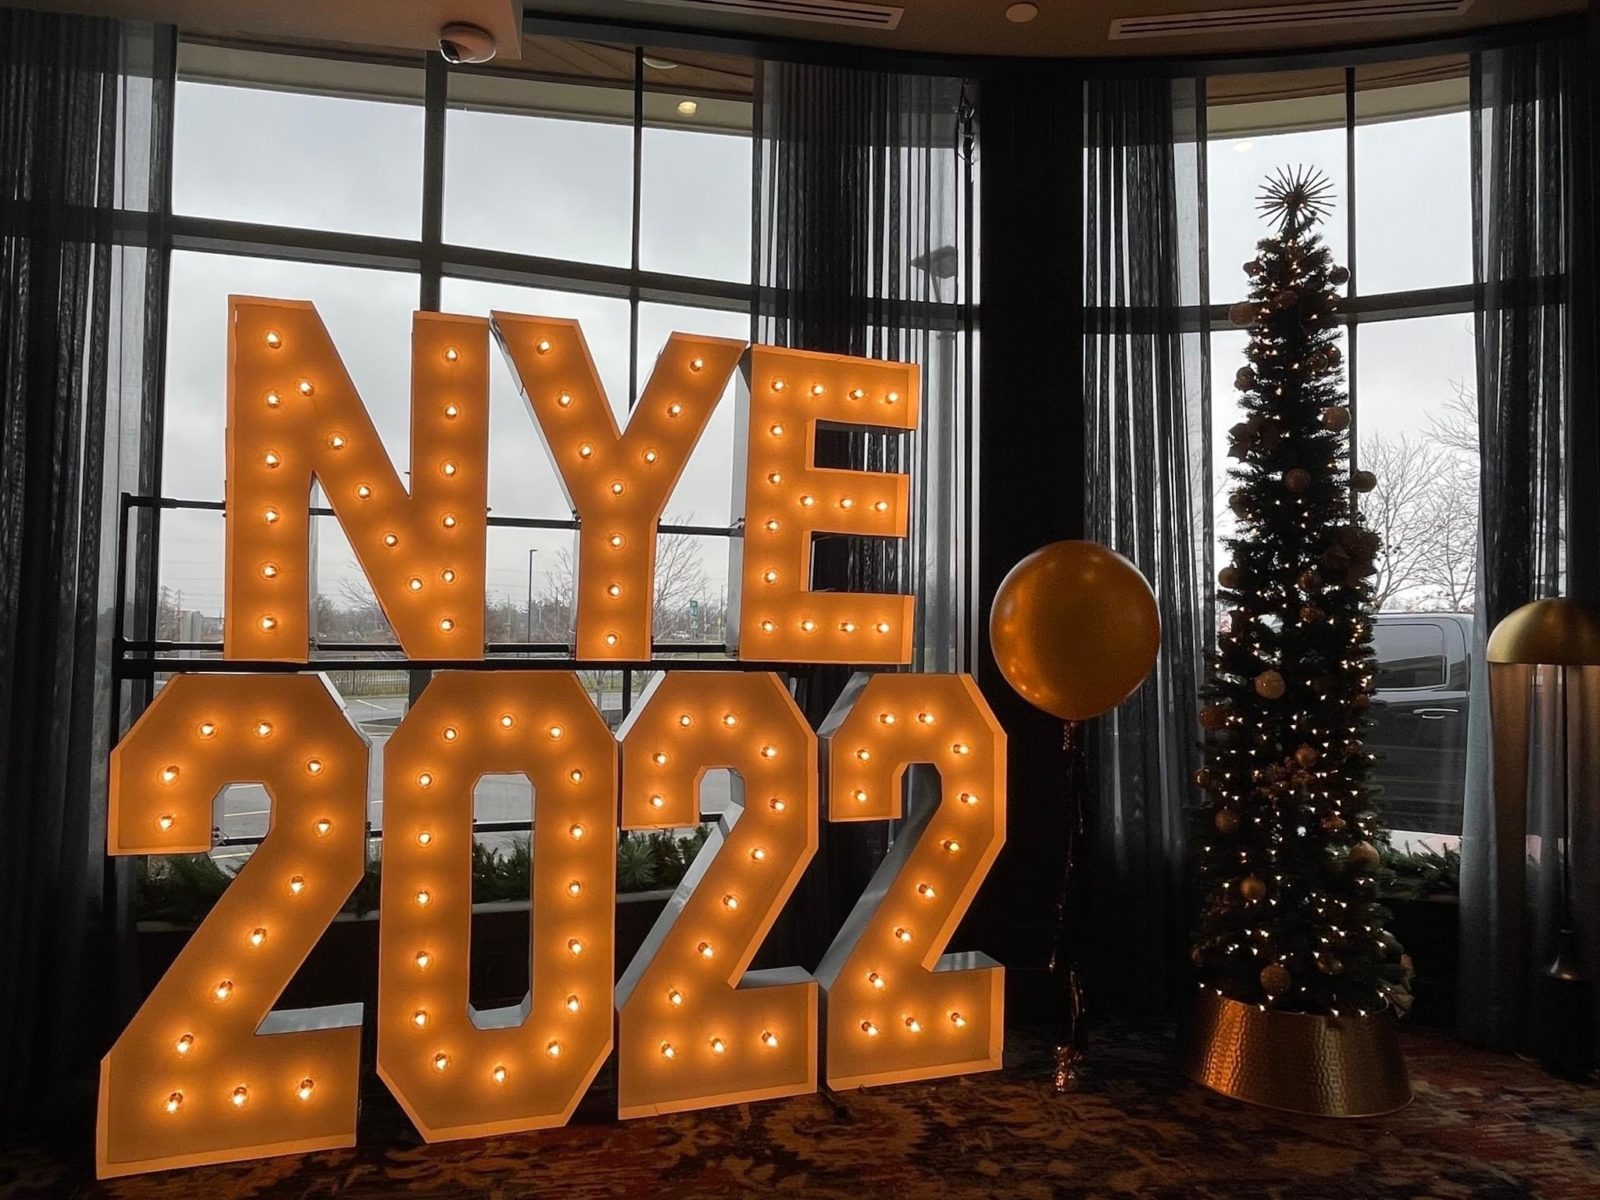 These Alpha-Lit marquee letters are the perfect festive addition to your New Year's Eve celebration